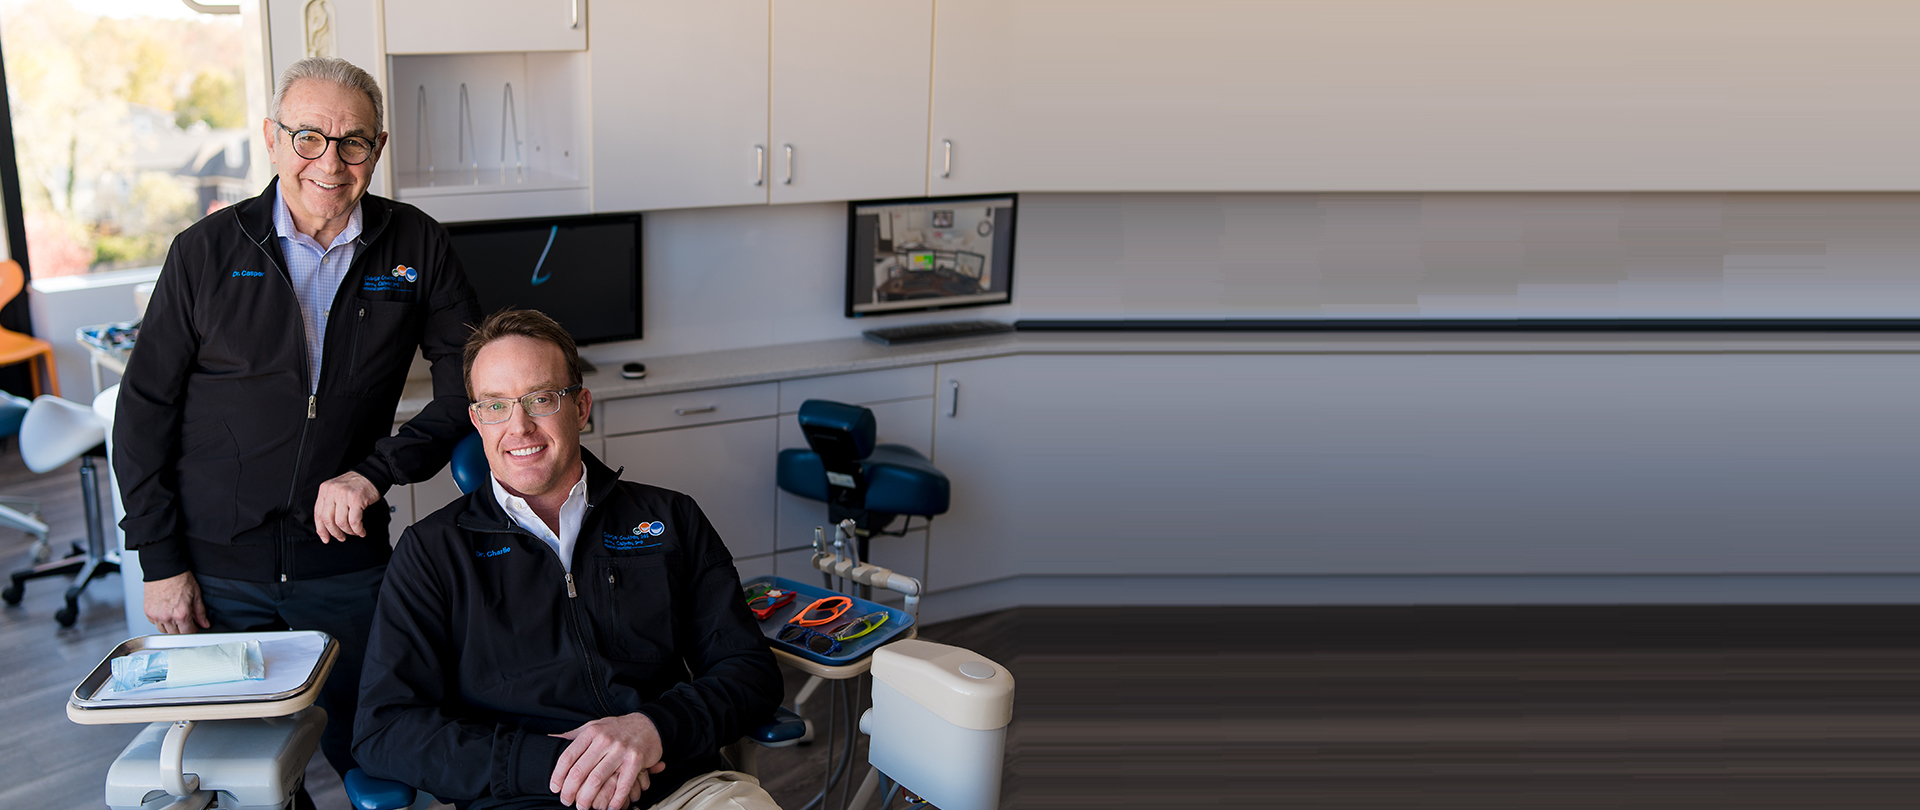 Dr. Charlie Coulter and Dr. Jerry Casper pose in the office of their pediatric dentistry practice in Washington, DC.